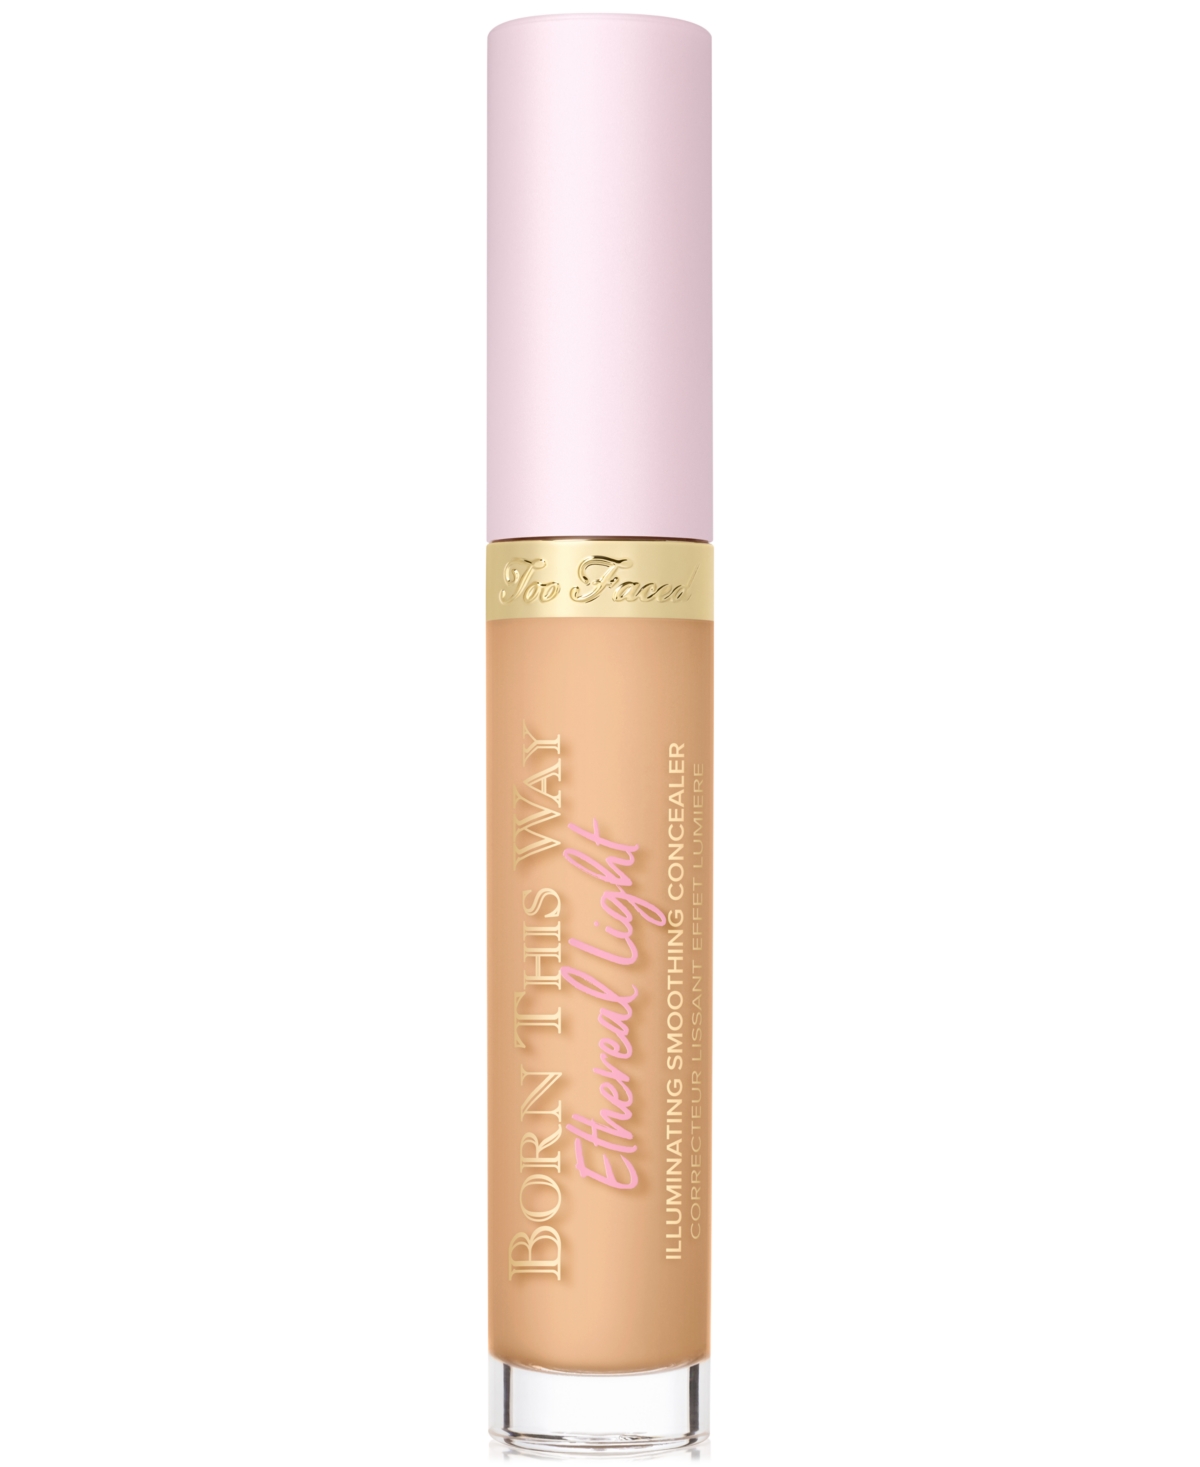 Too Faced Born This Way Ethereal Light Illuminating Smoothing Concealer In Honeybun - Tan With Rosy Undertones